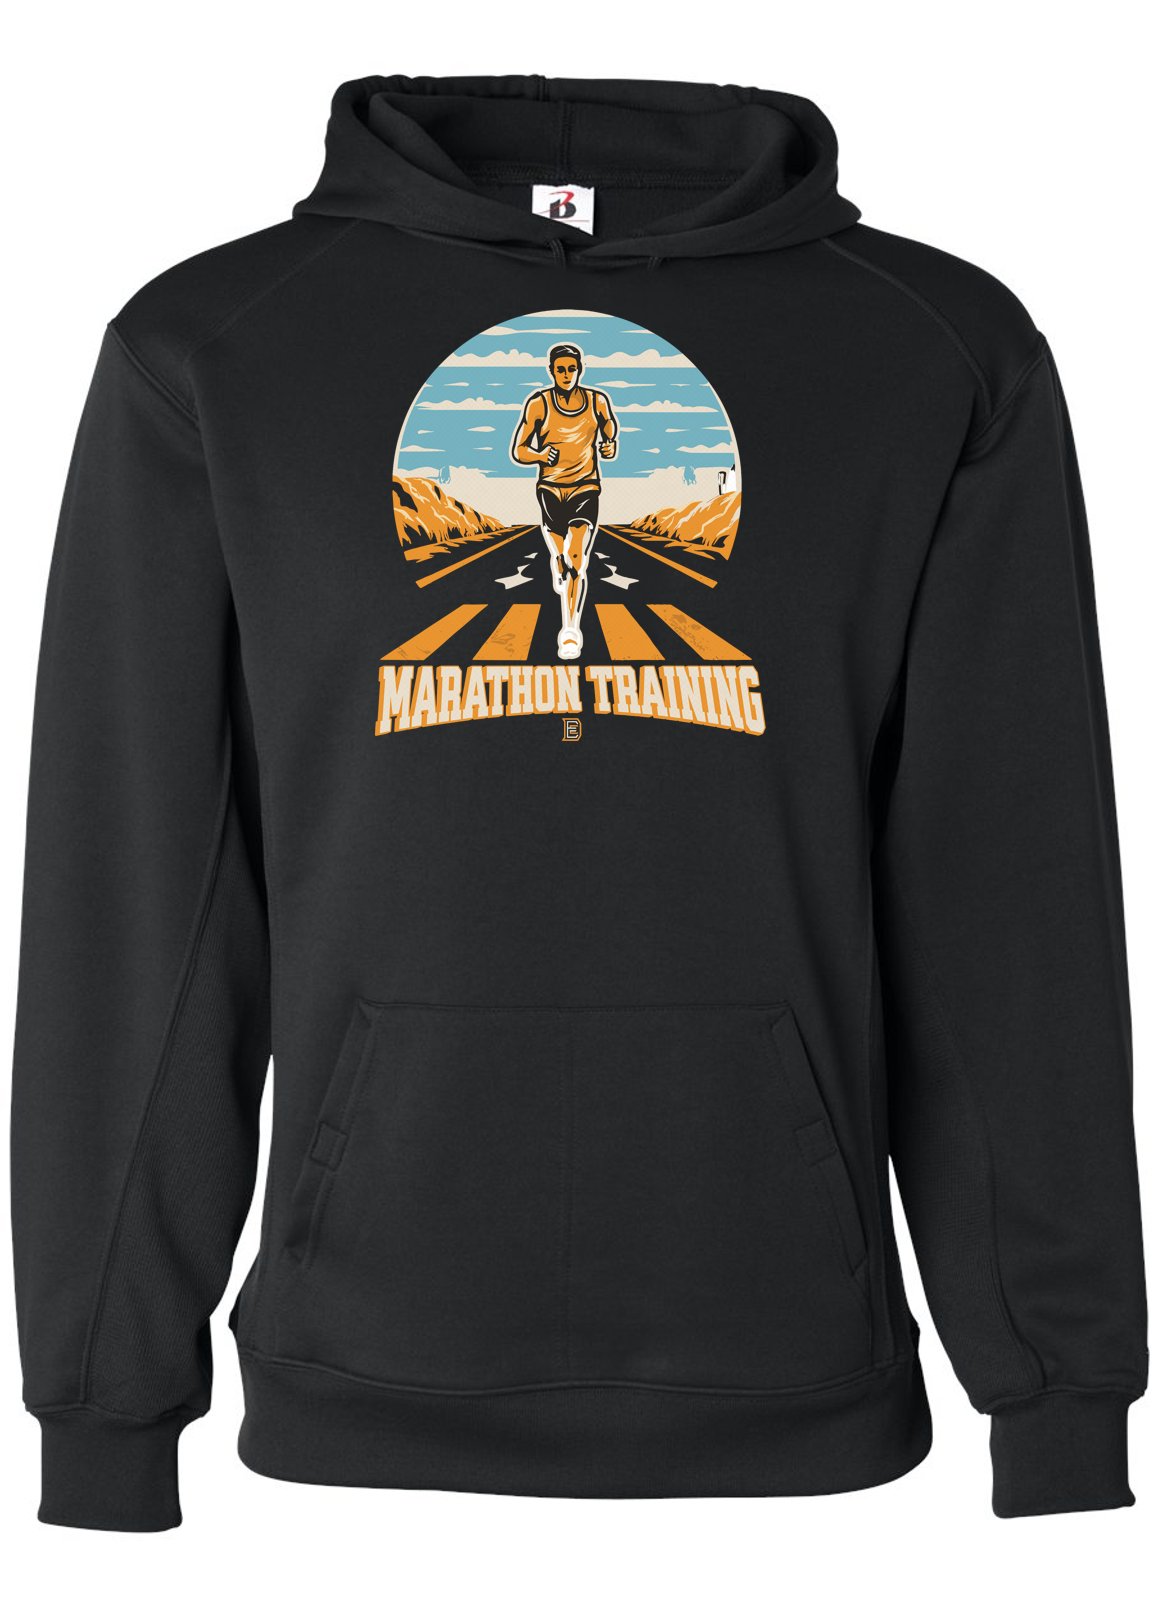 Conquer Every Mile: Marathon Training Hoodies for Running Champions -